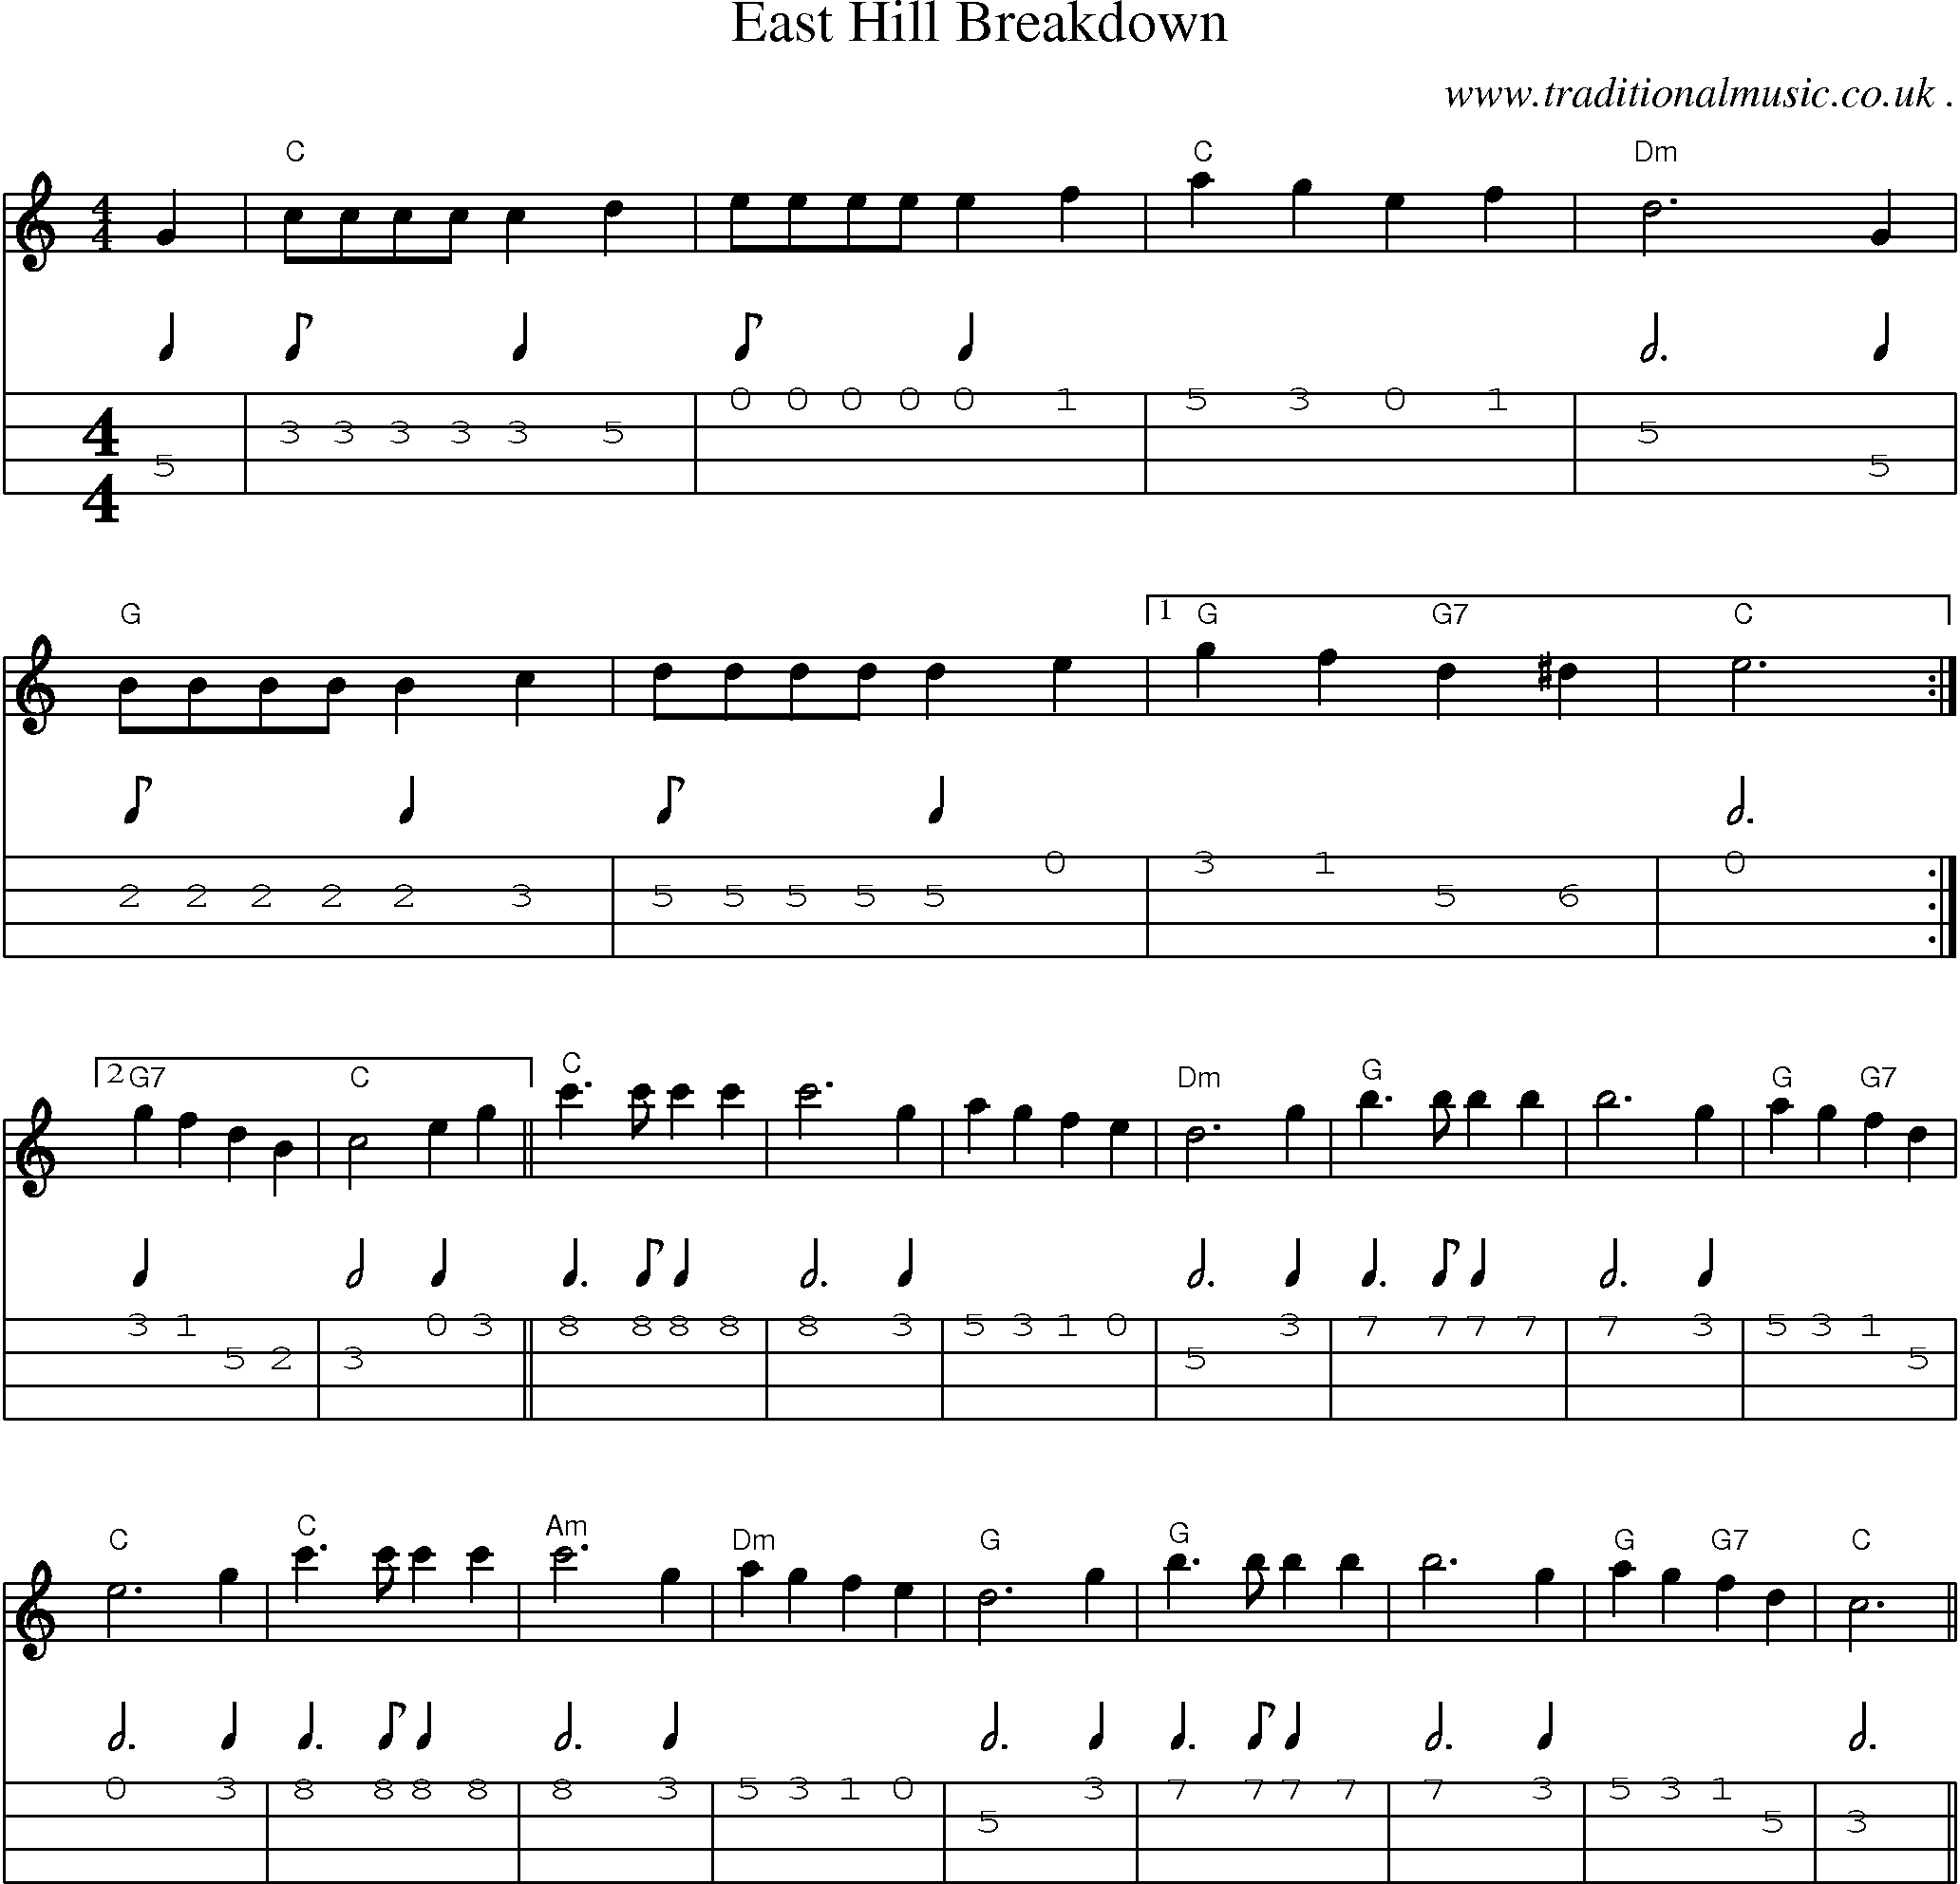 Music Score and Mandolin Tabs for East Hill Breakdown